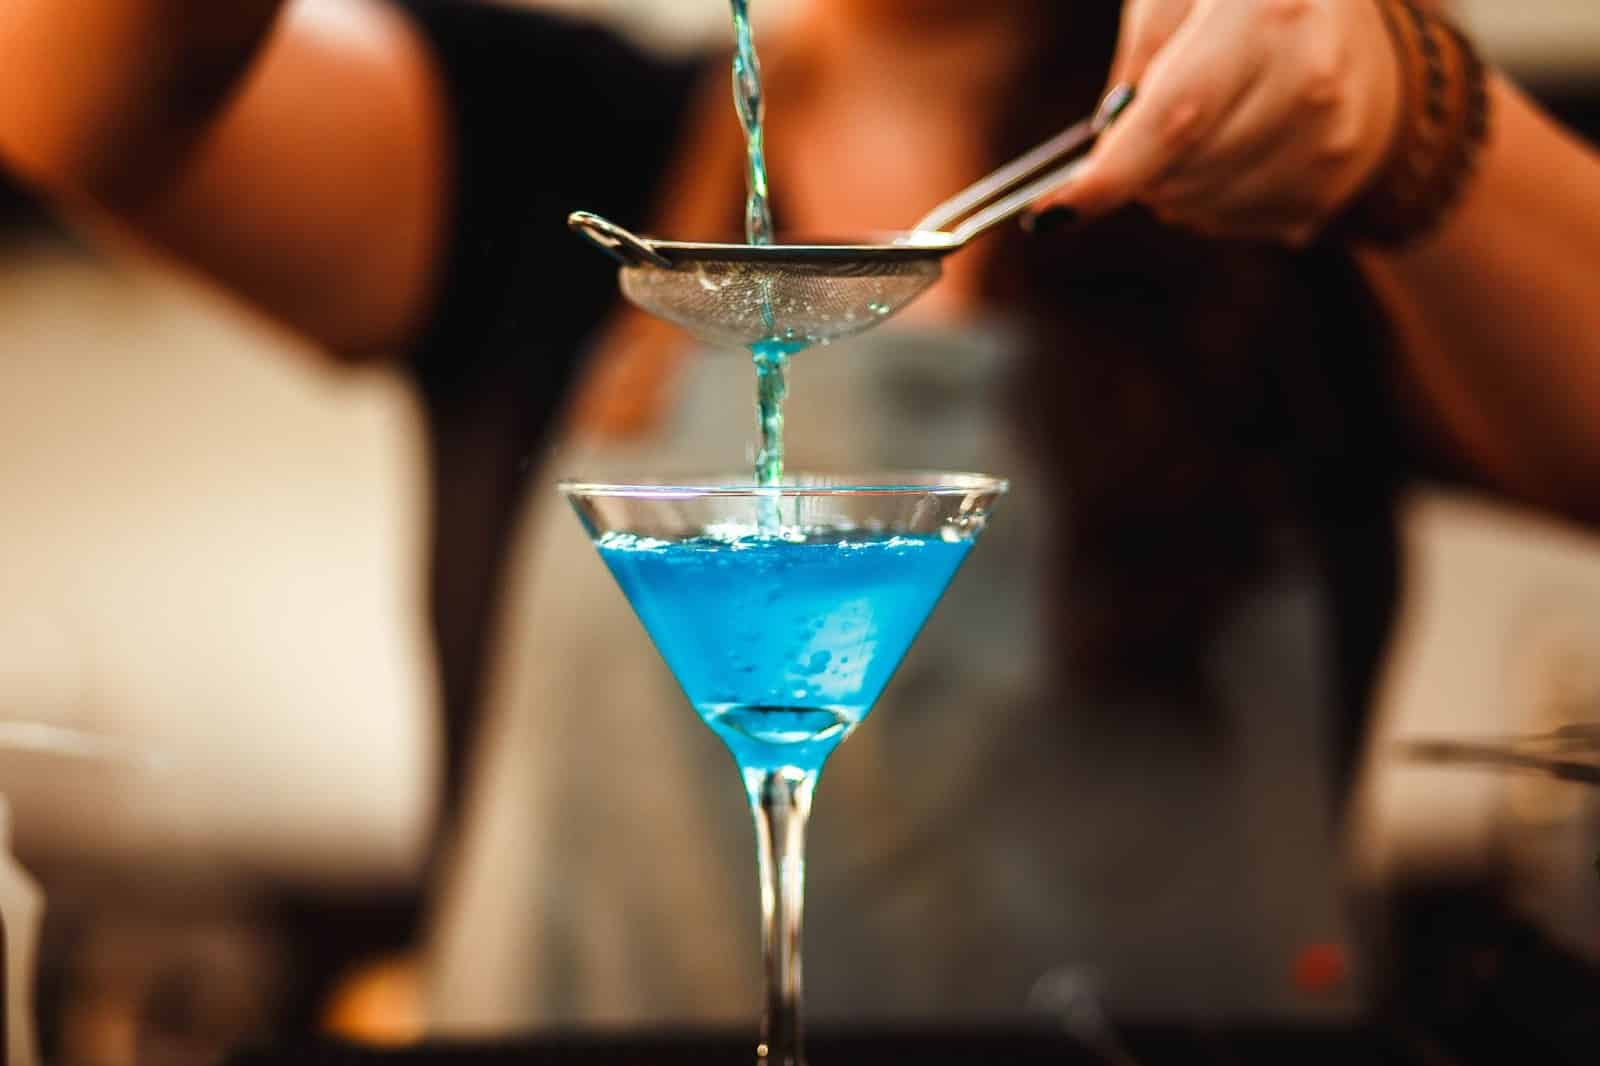 A glass of blue cocktail drink crafted by a female barista.